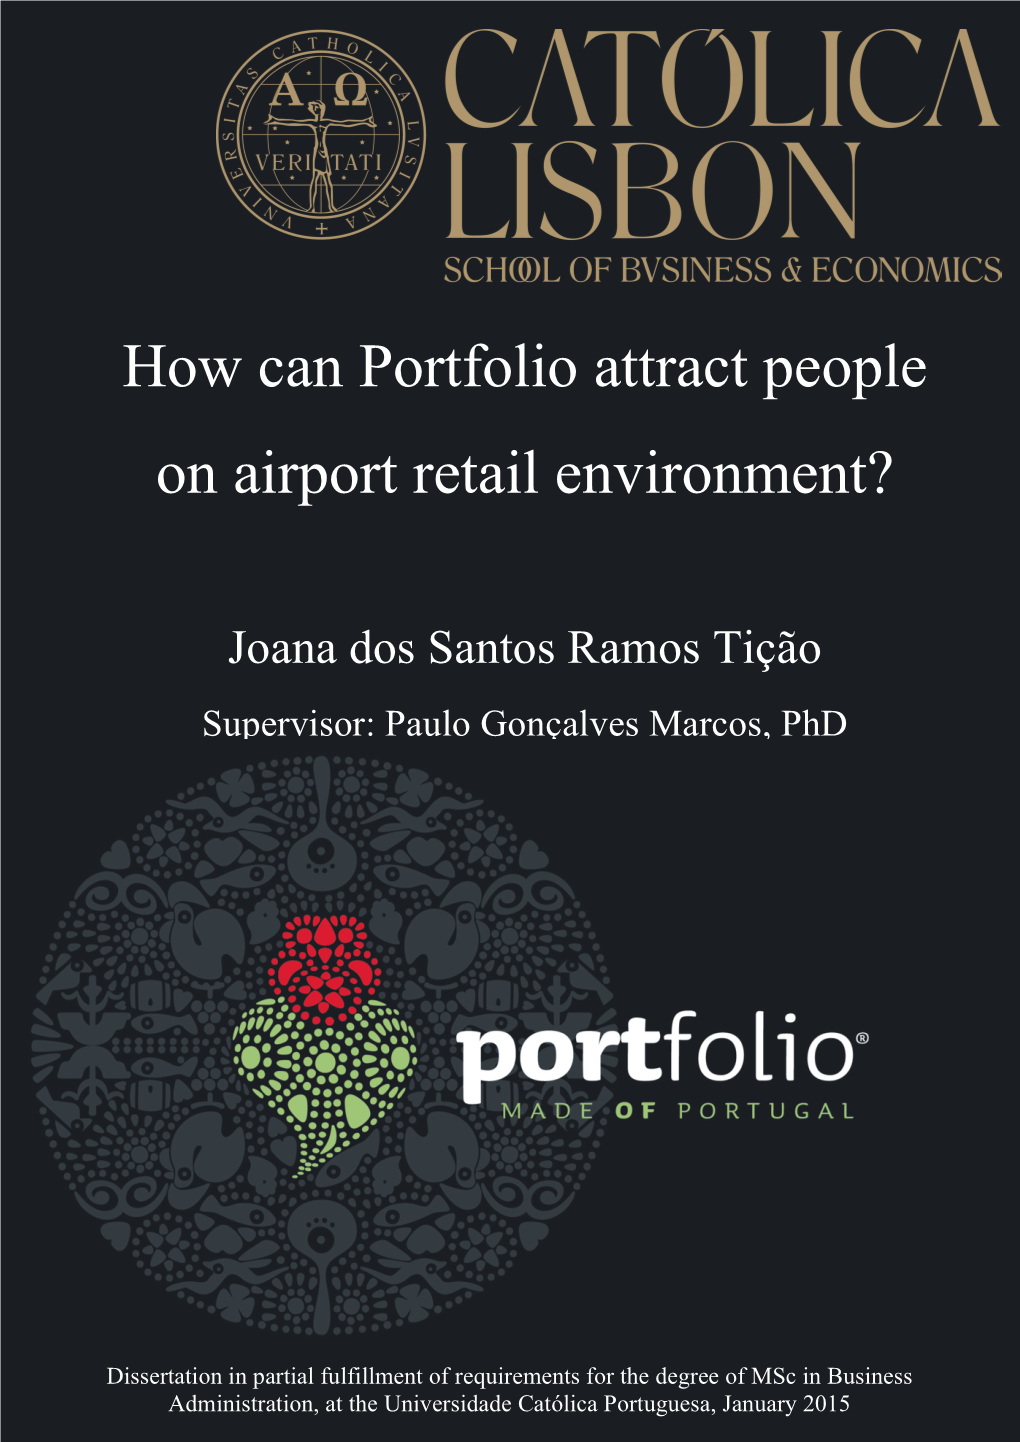 How Can Portfolio Attract People on Airport Retail Environment?